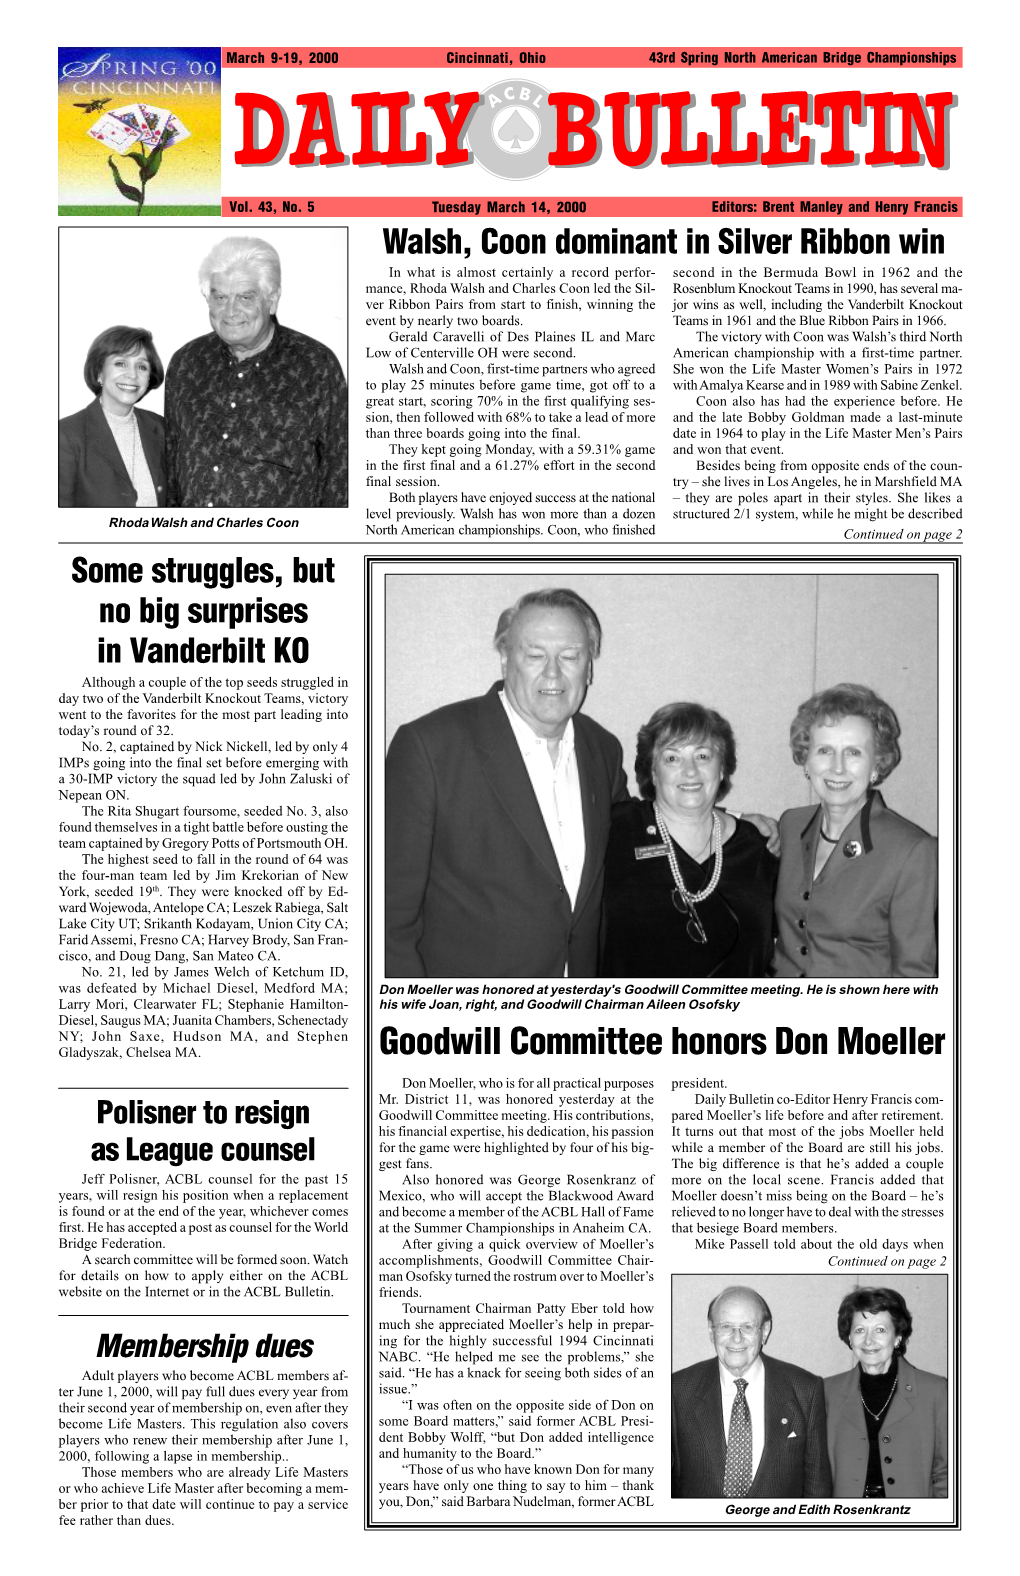 Goodwill Committee Honors Don Moeller